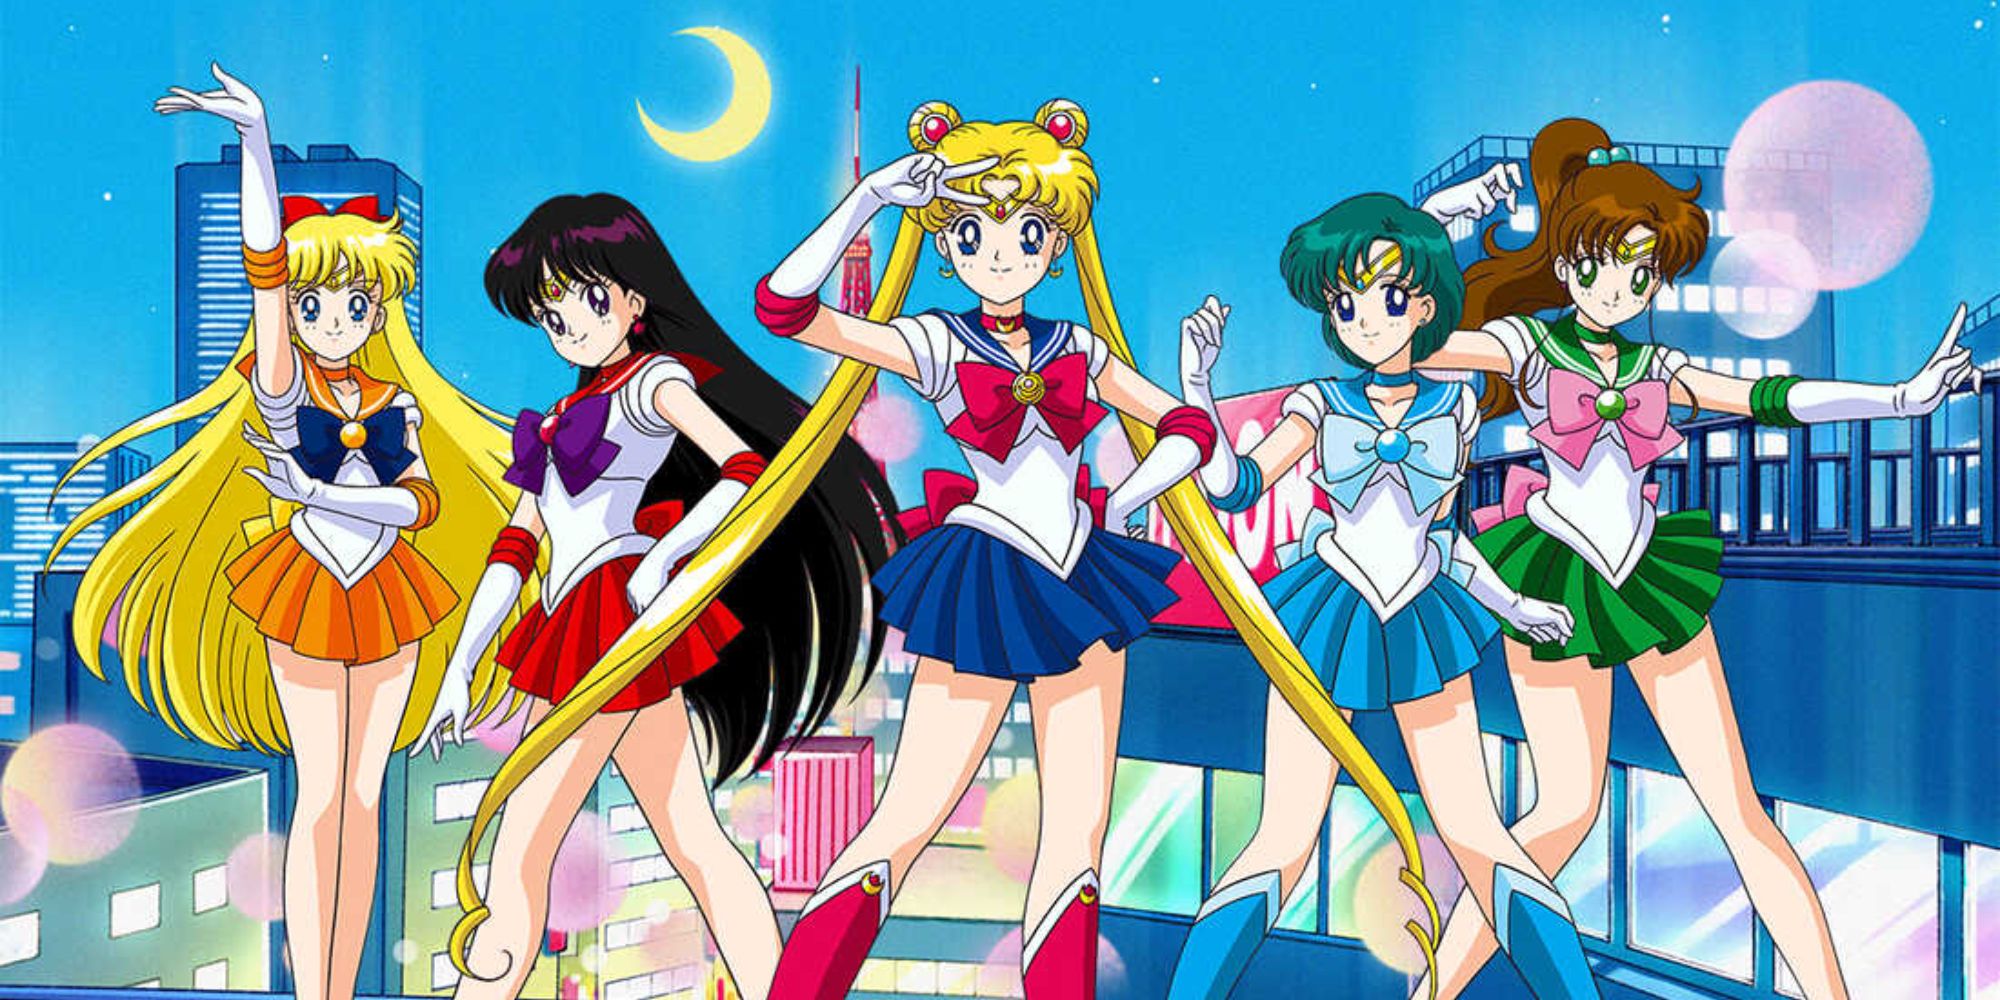 Cast of Sailor Moon posing on a building at night